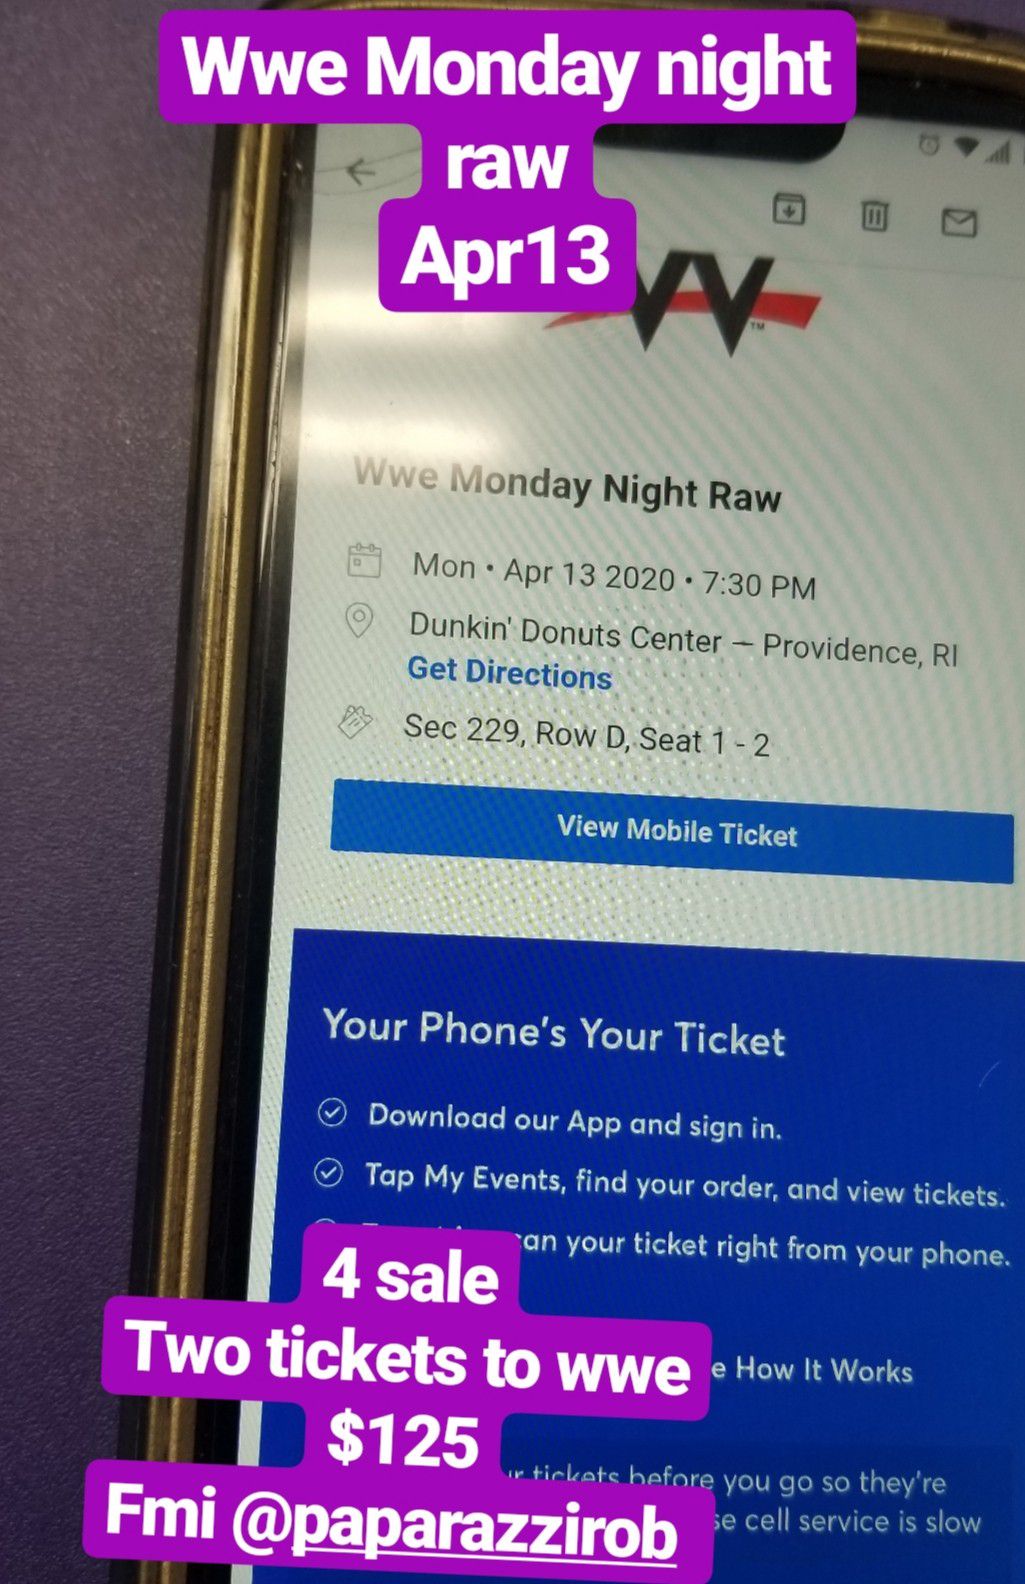 WWE MONDAY NIGHT RAW ... 2 TICKETS 125$ OR BEST OFFER